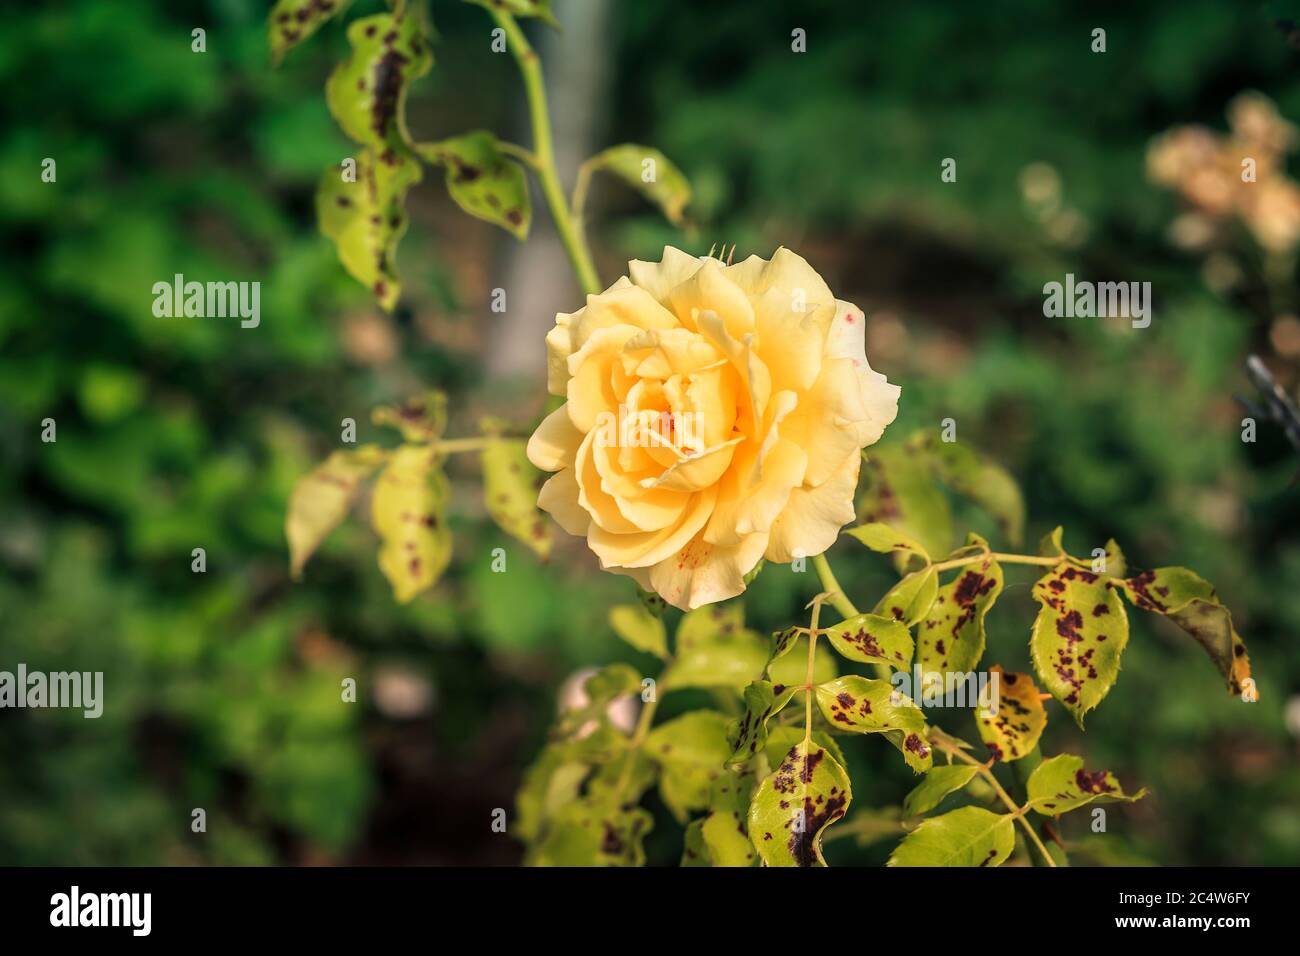 green background with beauty yellow rose and leaves with black spots Stock Photo